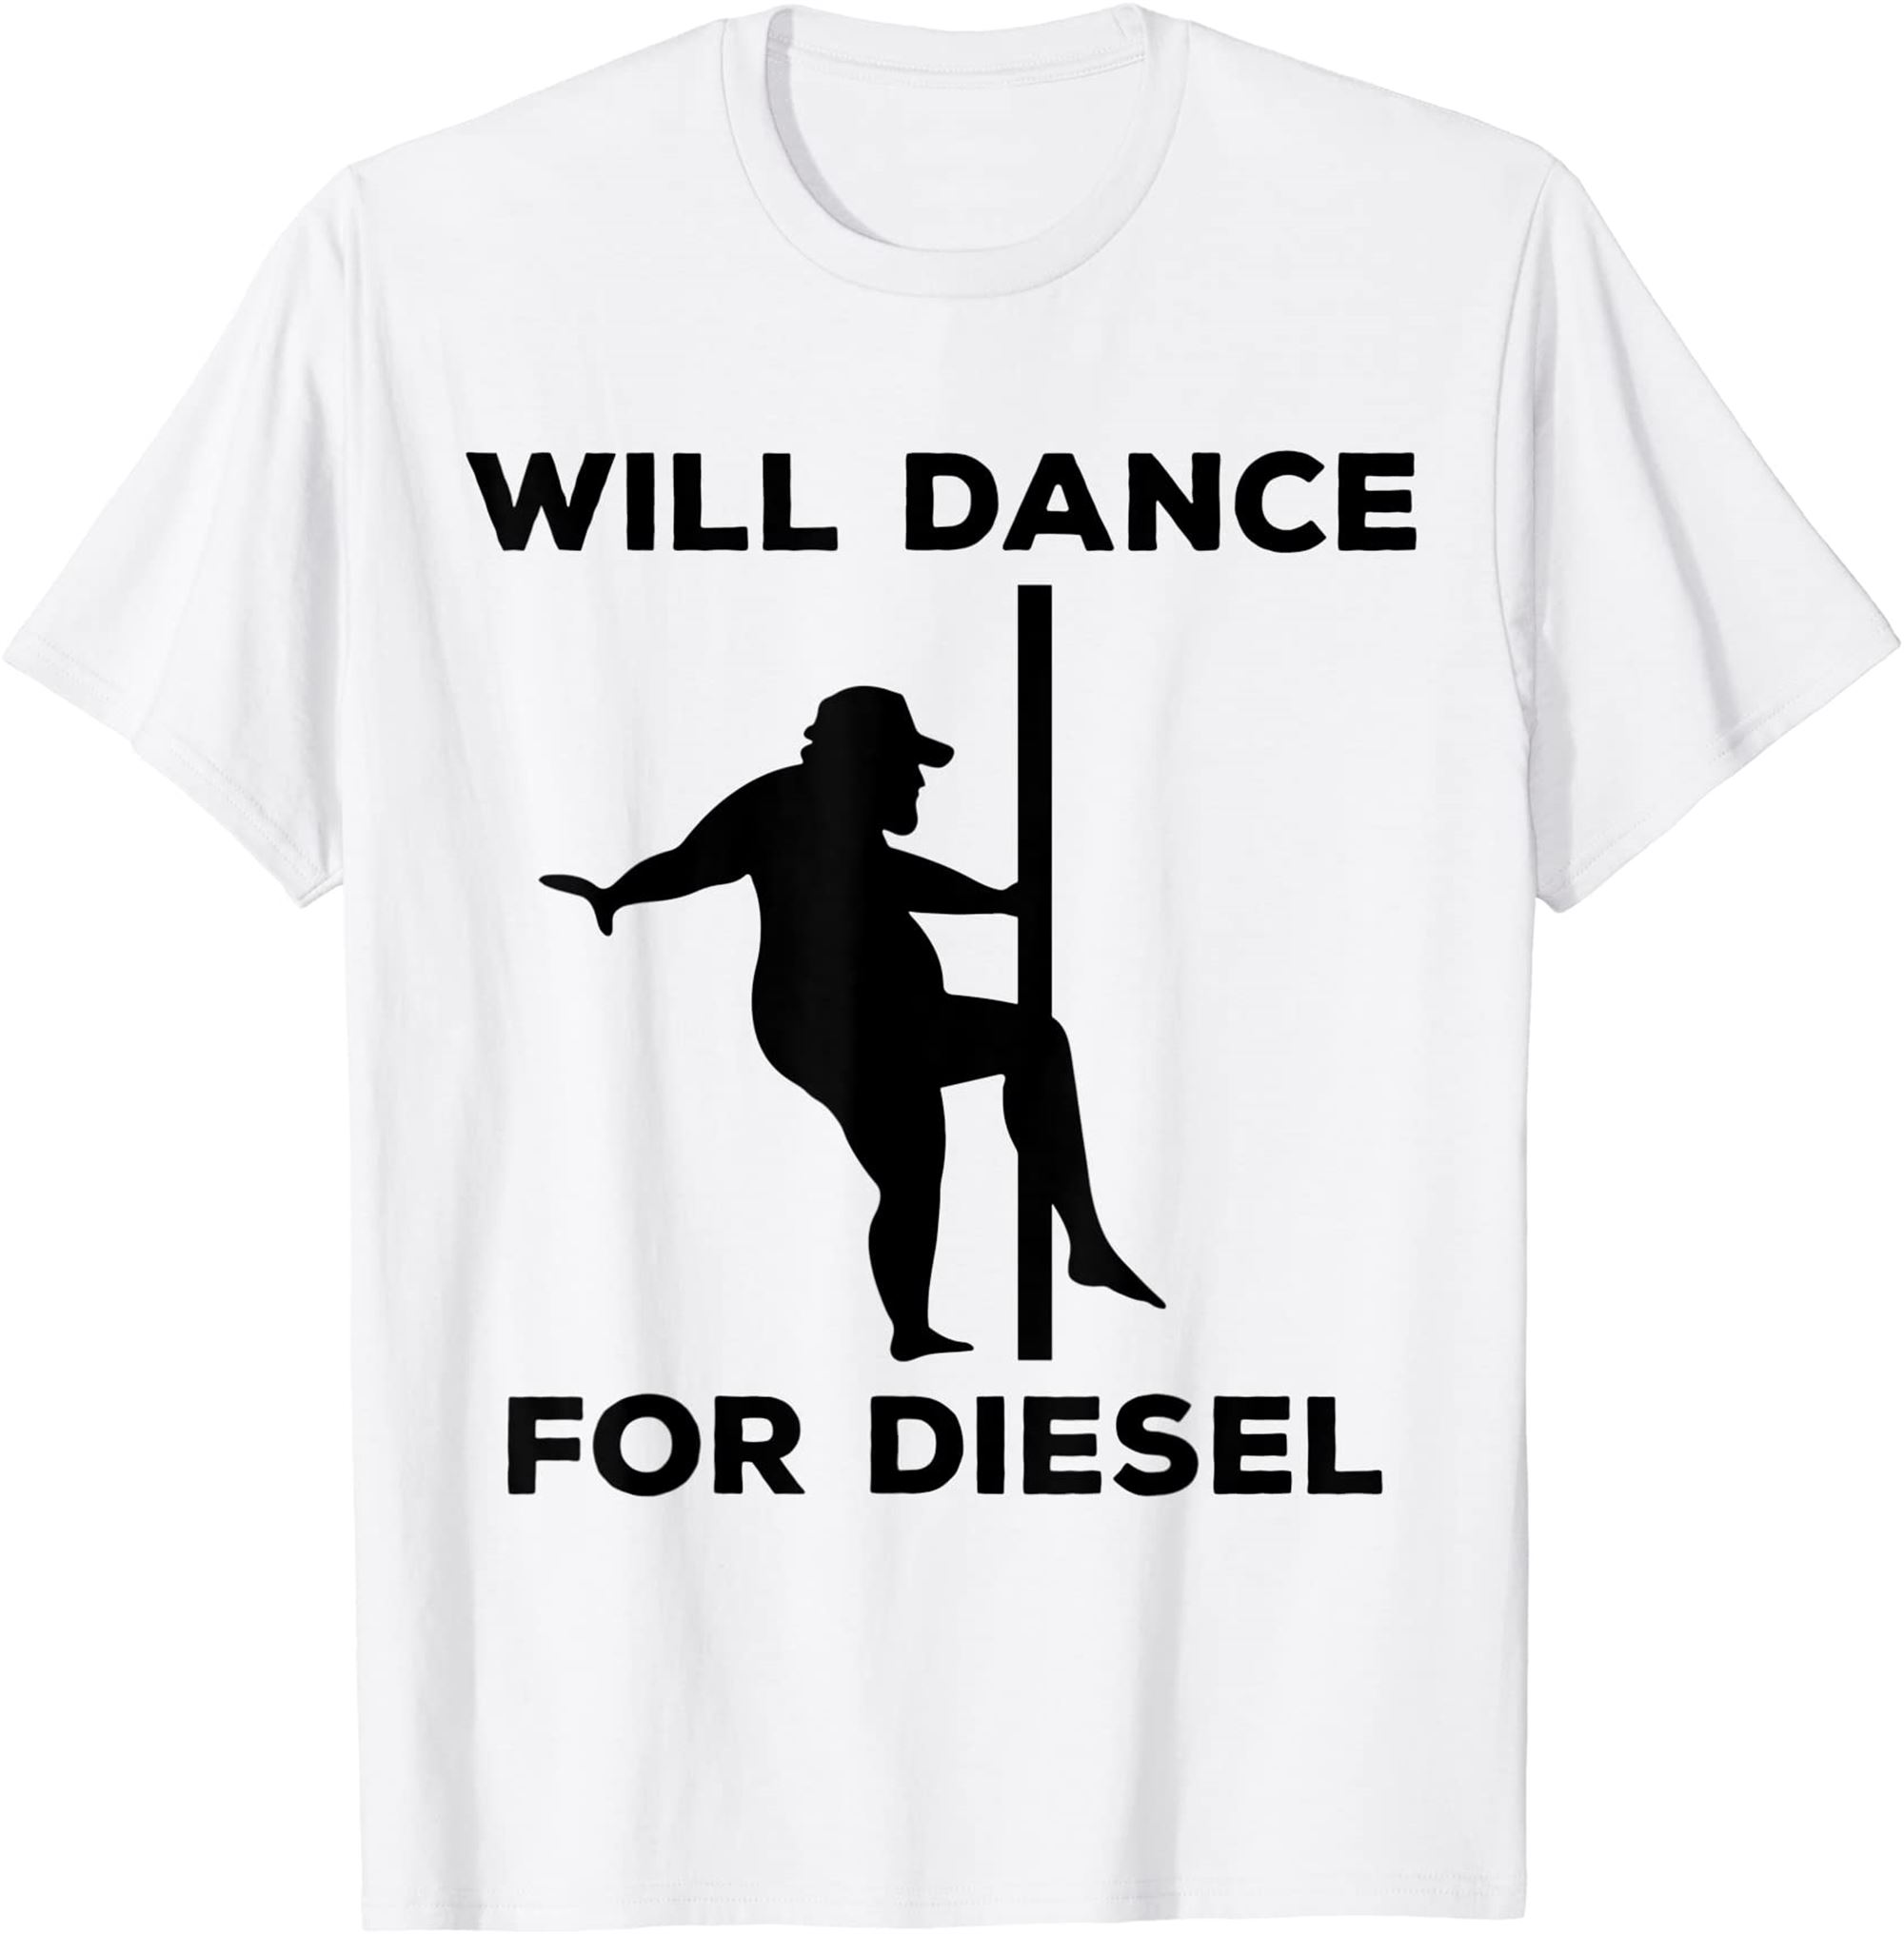 Funny Fat Guy Will Dance For Diesel Fat Man Pole Dance T-shirt Full Size Up To 5xl